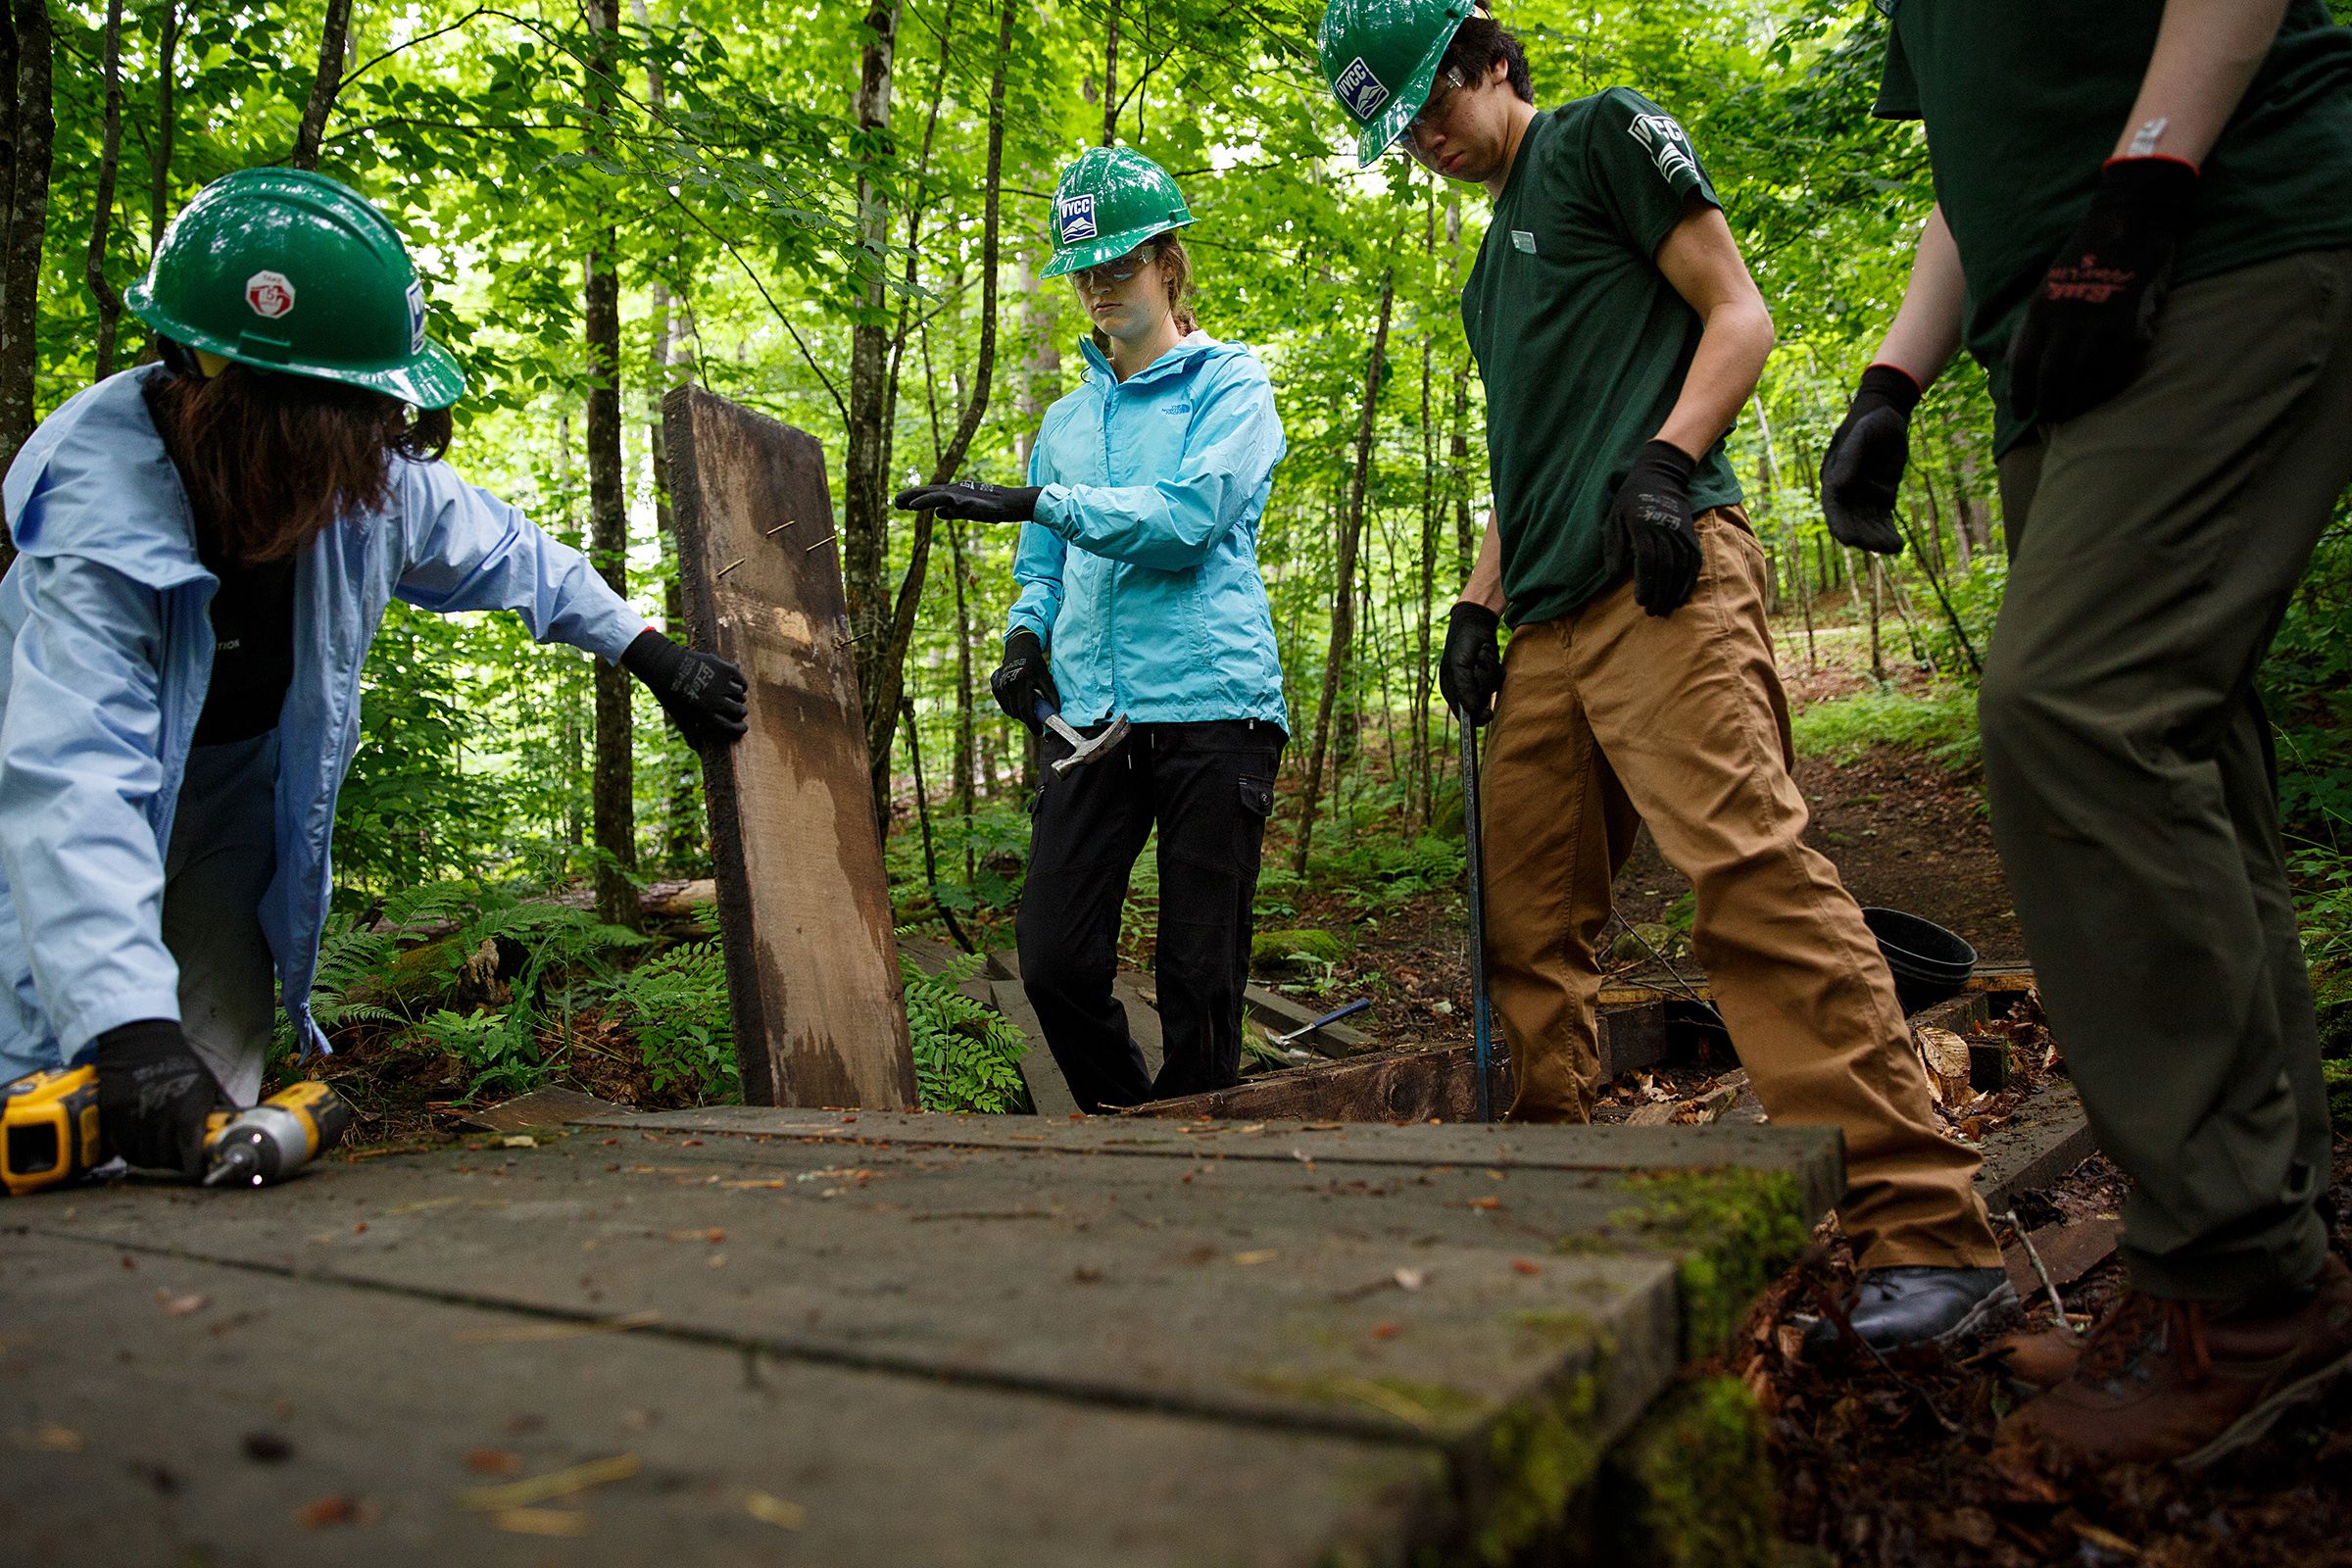 Vermont Youth Conservation Corps members, from left, Beatrix Garza, 15, of Woodstock, Vt., Chloe Masillo, 15, of Pittsfield, Vt., Ben Johnsen, 15, of Pomfret, Vt., and Andries Morin, 16, of Pittsfield, Vt., work to replace a footbridge near the Prosper Trail trailhead at Marsh-Billings-Rockefeller National Historic Park in Woodstock, Vt., on Tuesday, June 22, 2021. VYCC hires young people, ages 15-26, to do farm and conservation work throughout the state to help them gain leadership and career skills while engaging with Vermont's natural environment. (Valley News / Report For America - Alex Driehaus) Copyright Valley News. May not be reprinted or used online without permission. Send requests to permission@vnews.com.